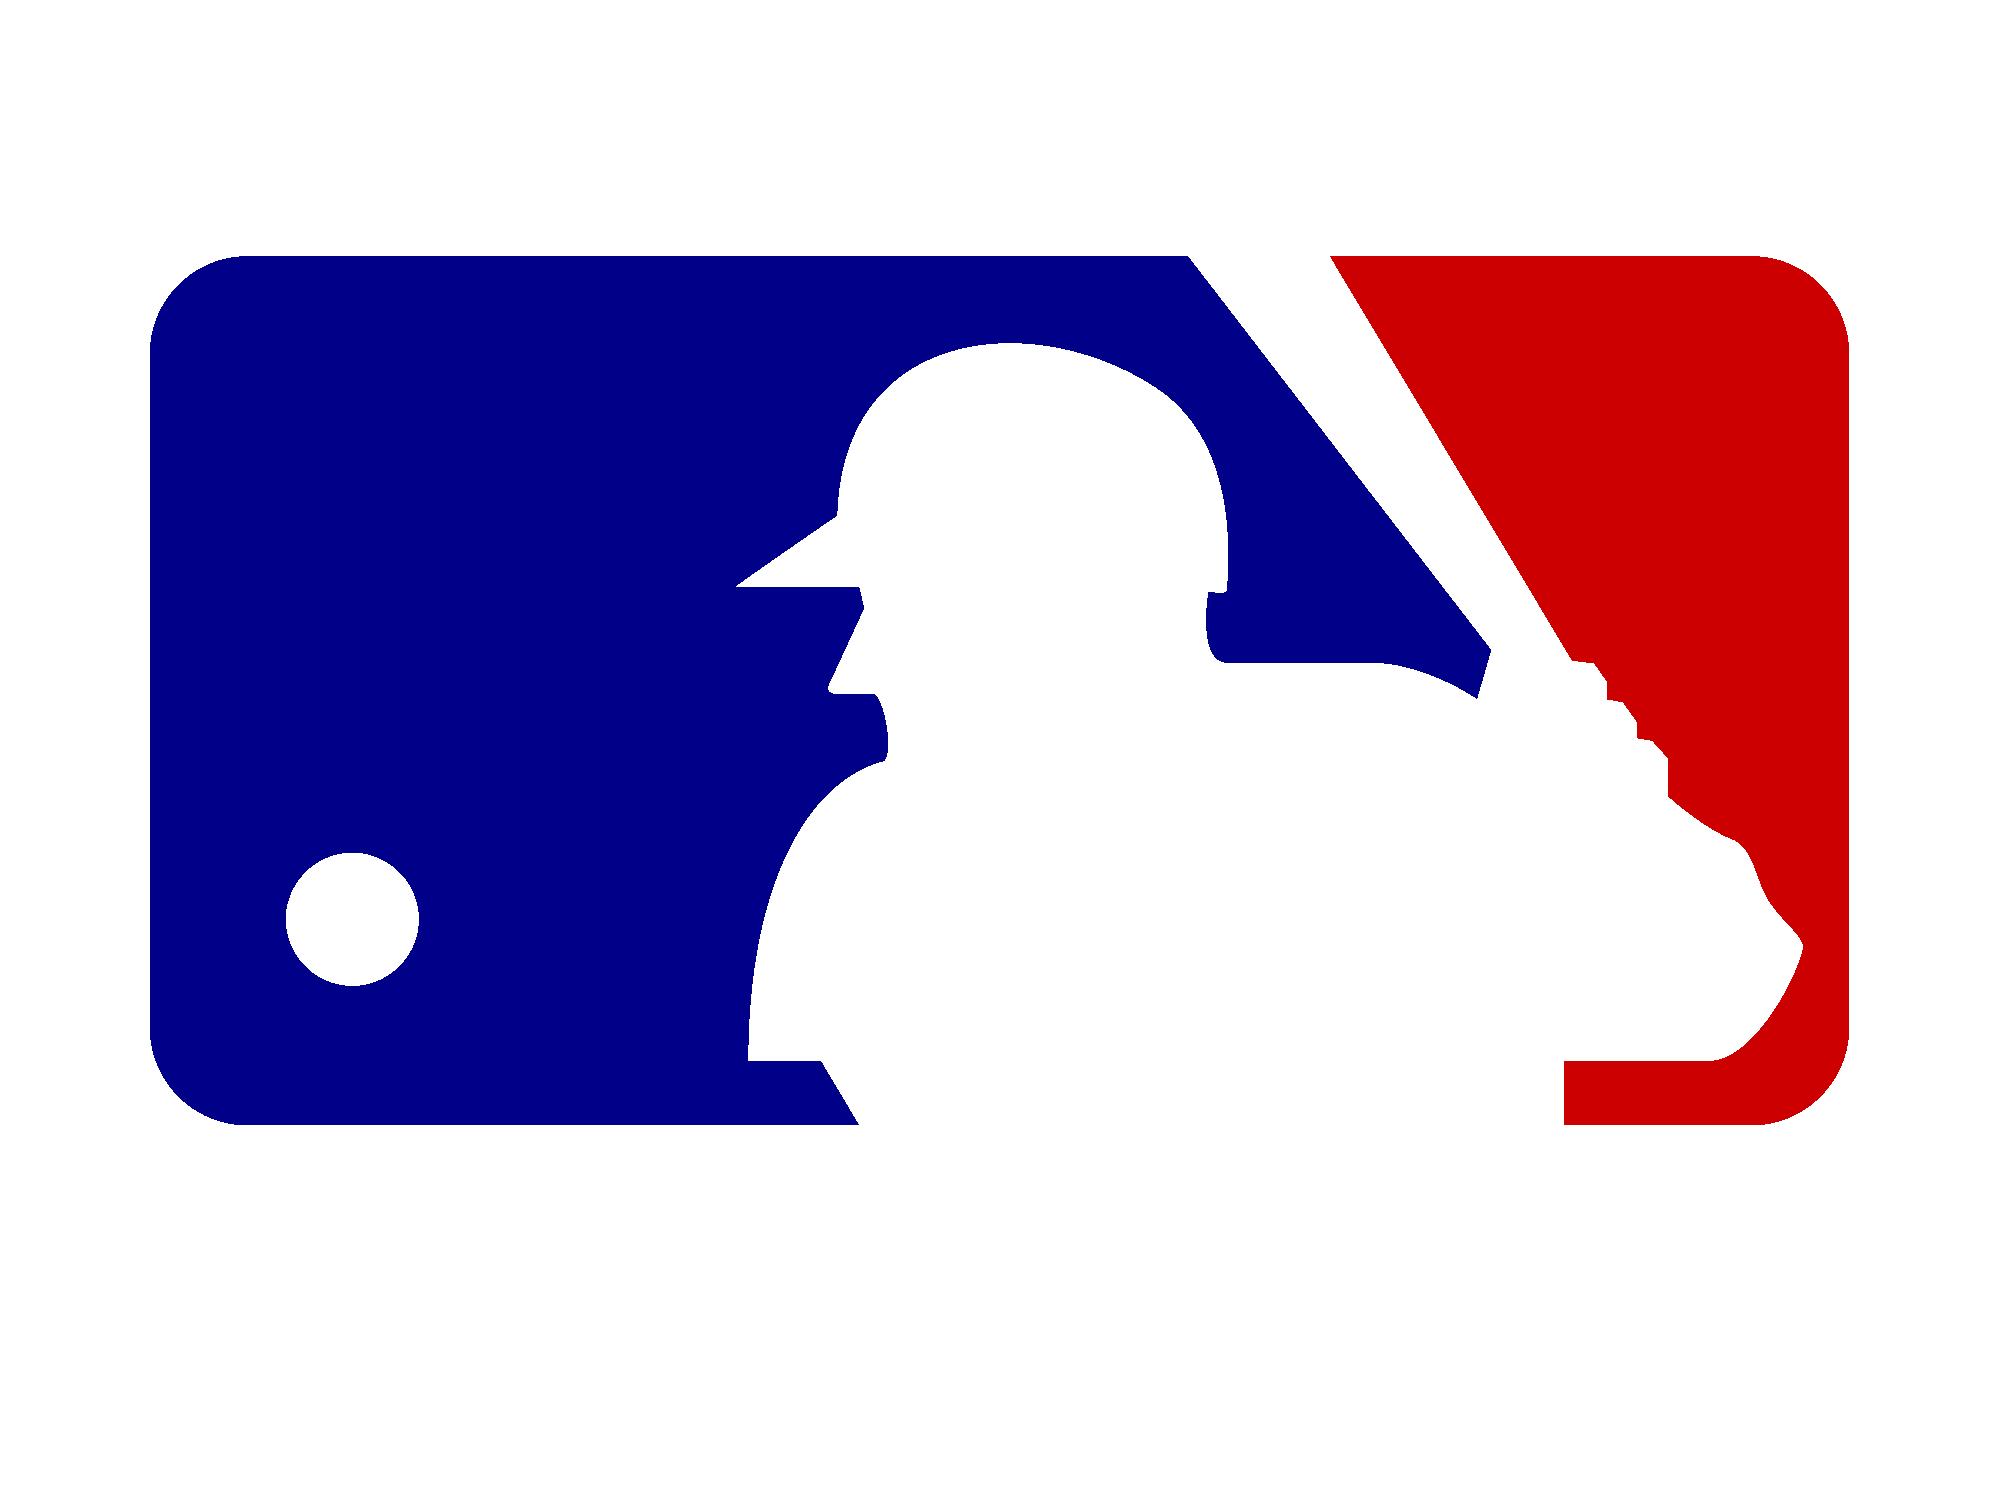 2022 MLB Lockout Updates: Owners and players strike deal on new